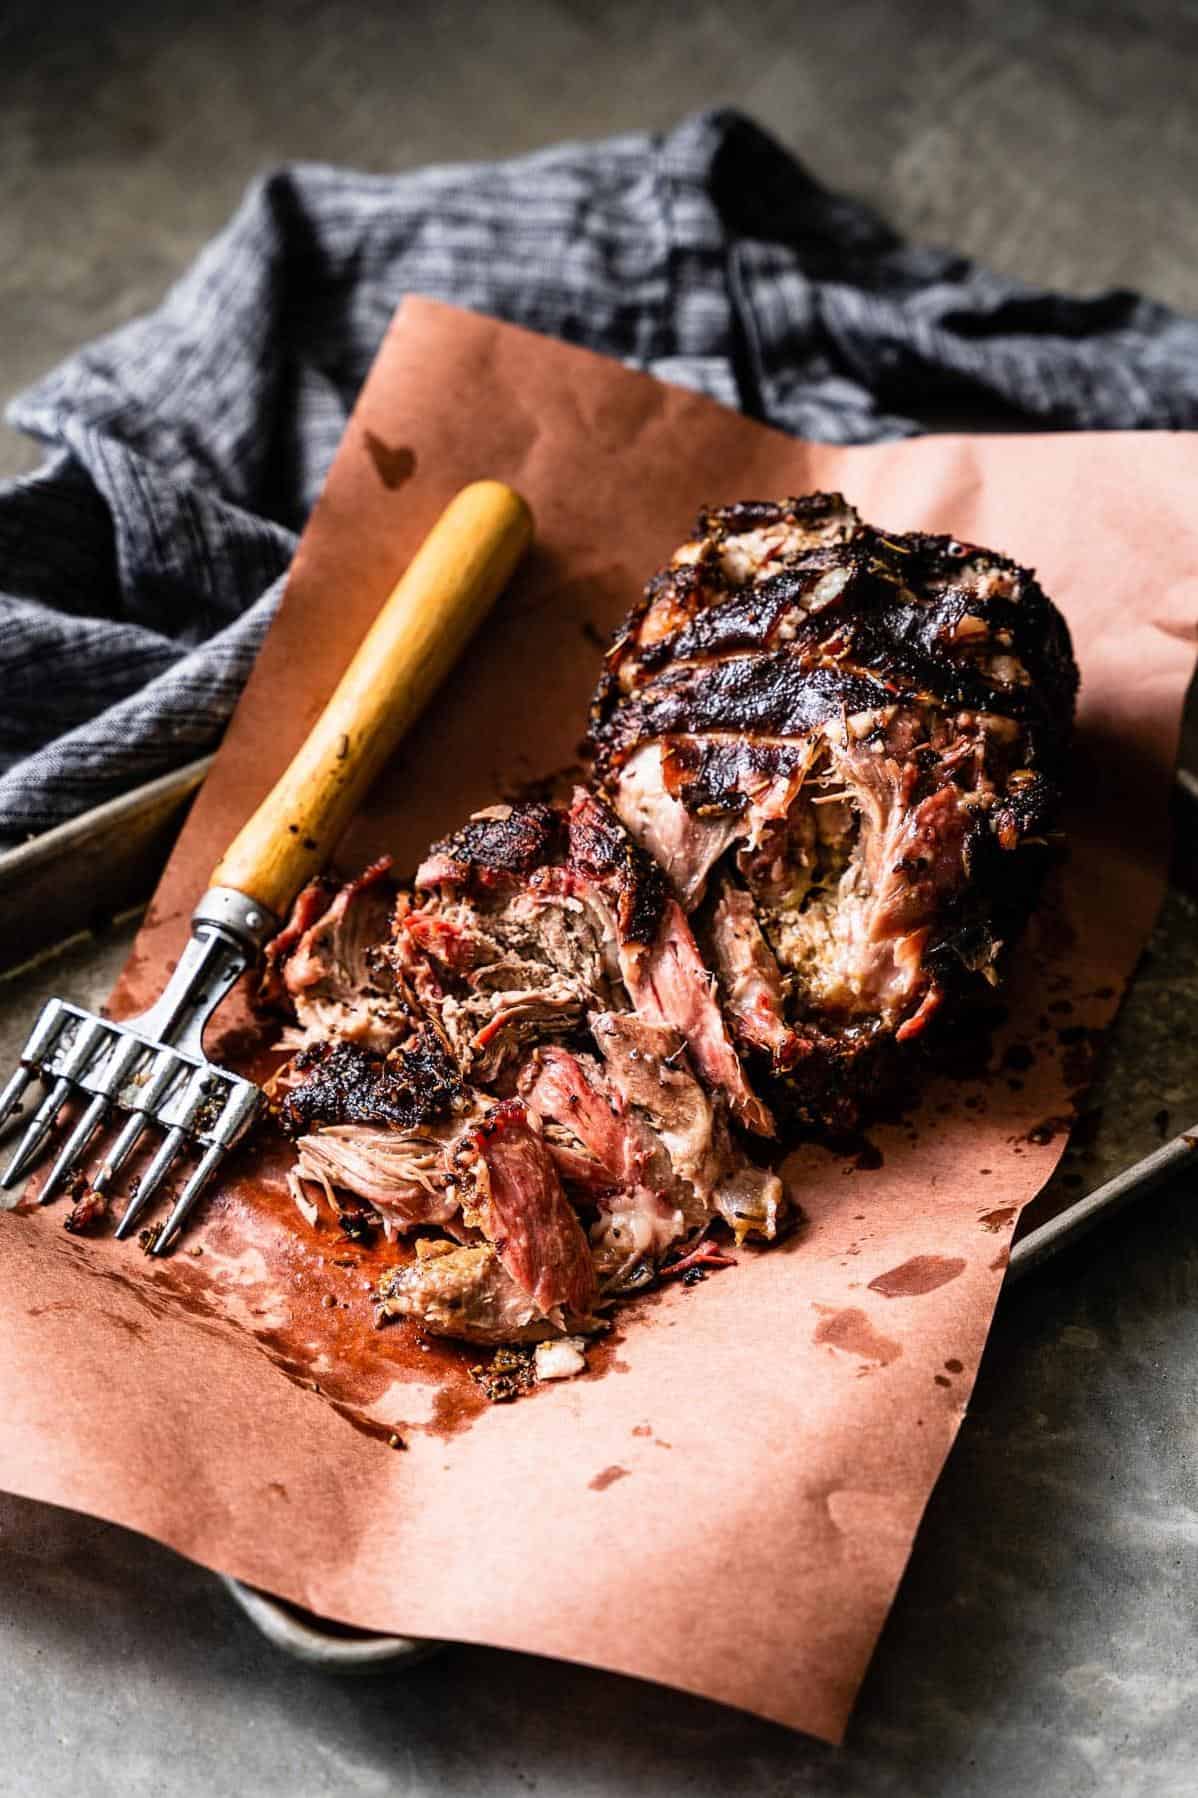  Smoky, succulent, and oh so flavorful, this lamb roast recipe will be a hit with your family and friends.